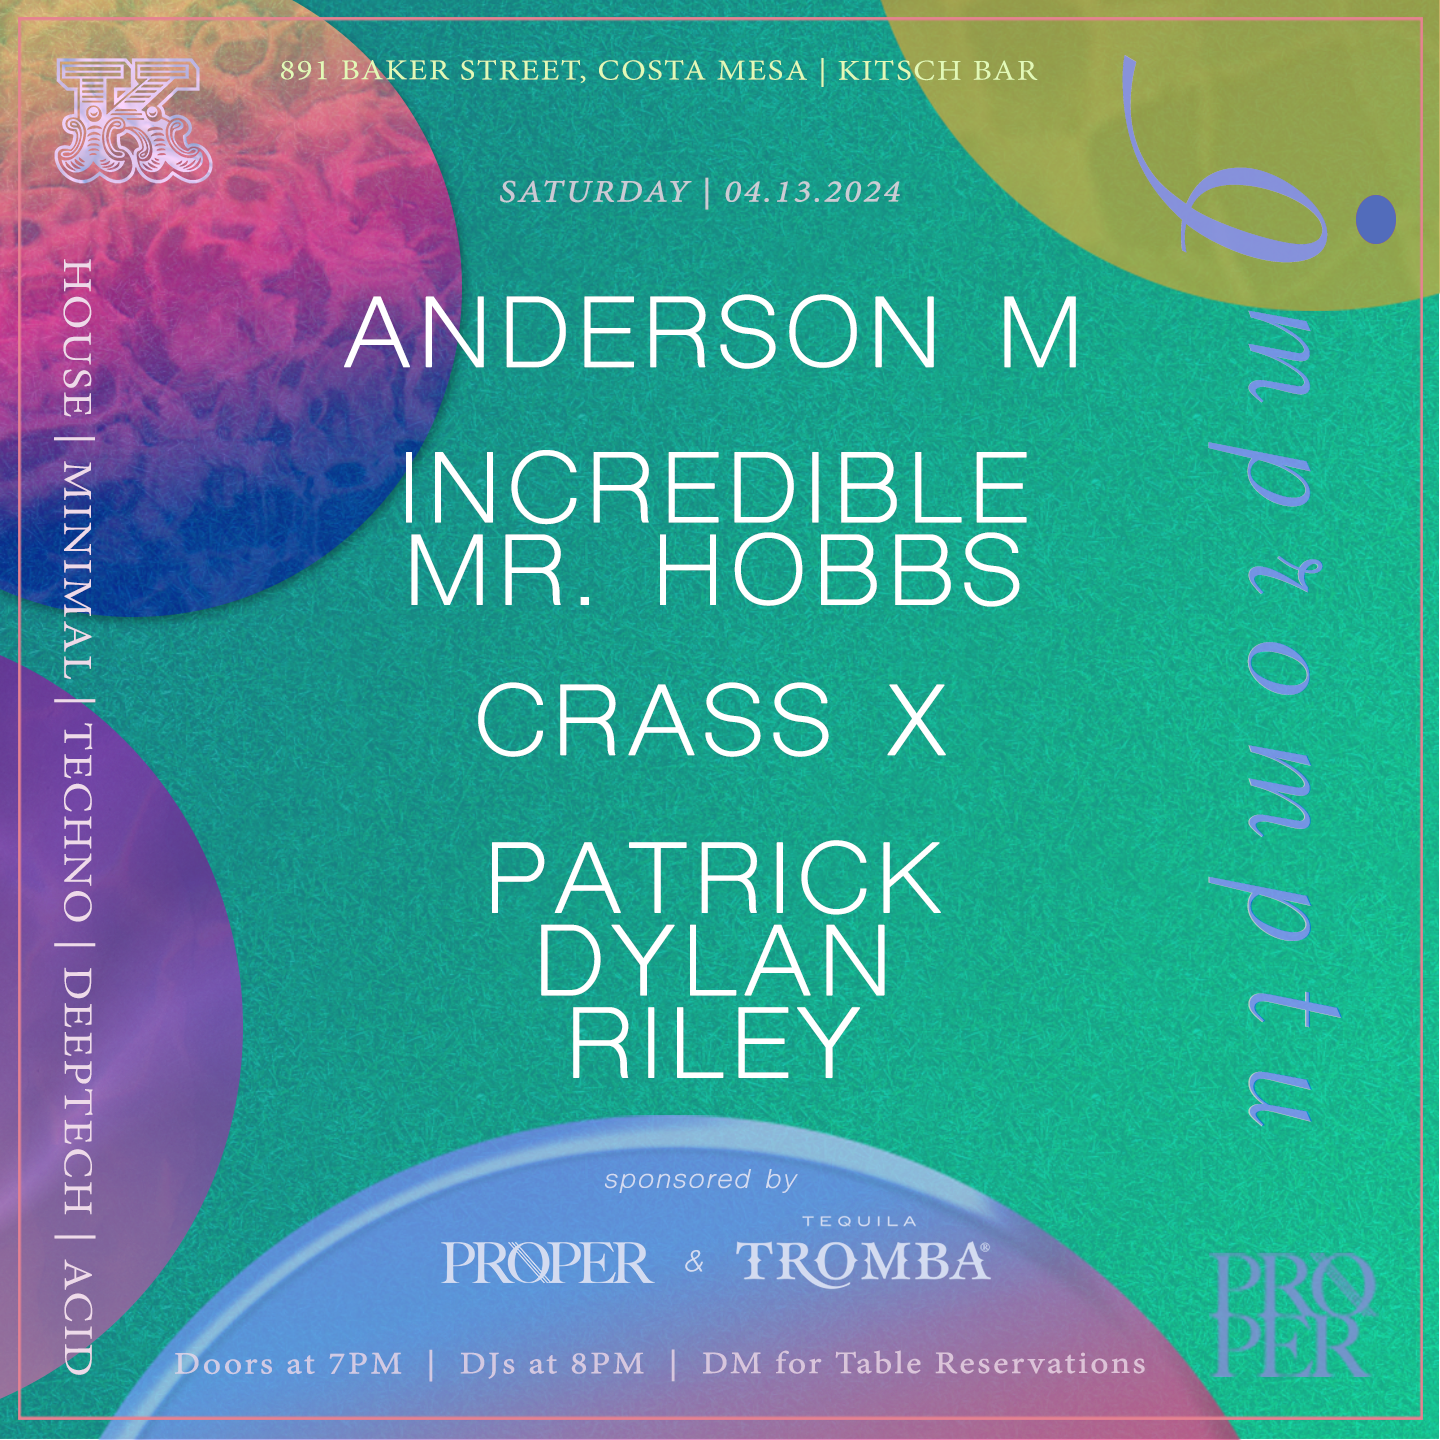 Impromptu - Anderson M, Crass X, Incredible Mr. Hobbs, and Patrick Dylan Riley - フライヤー表